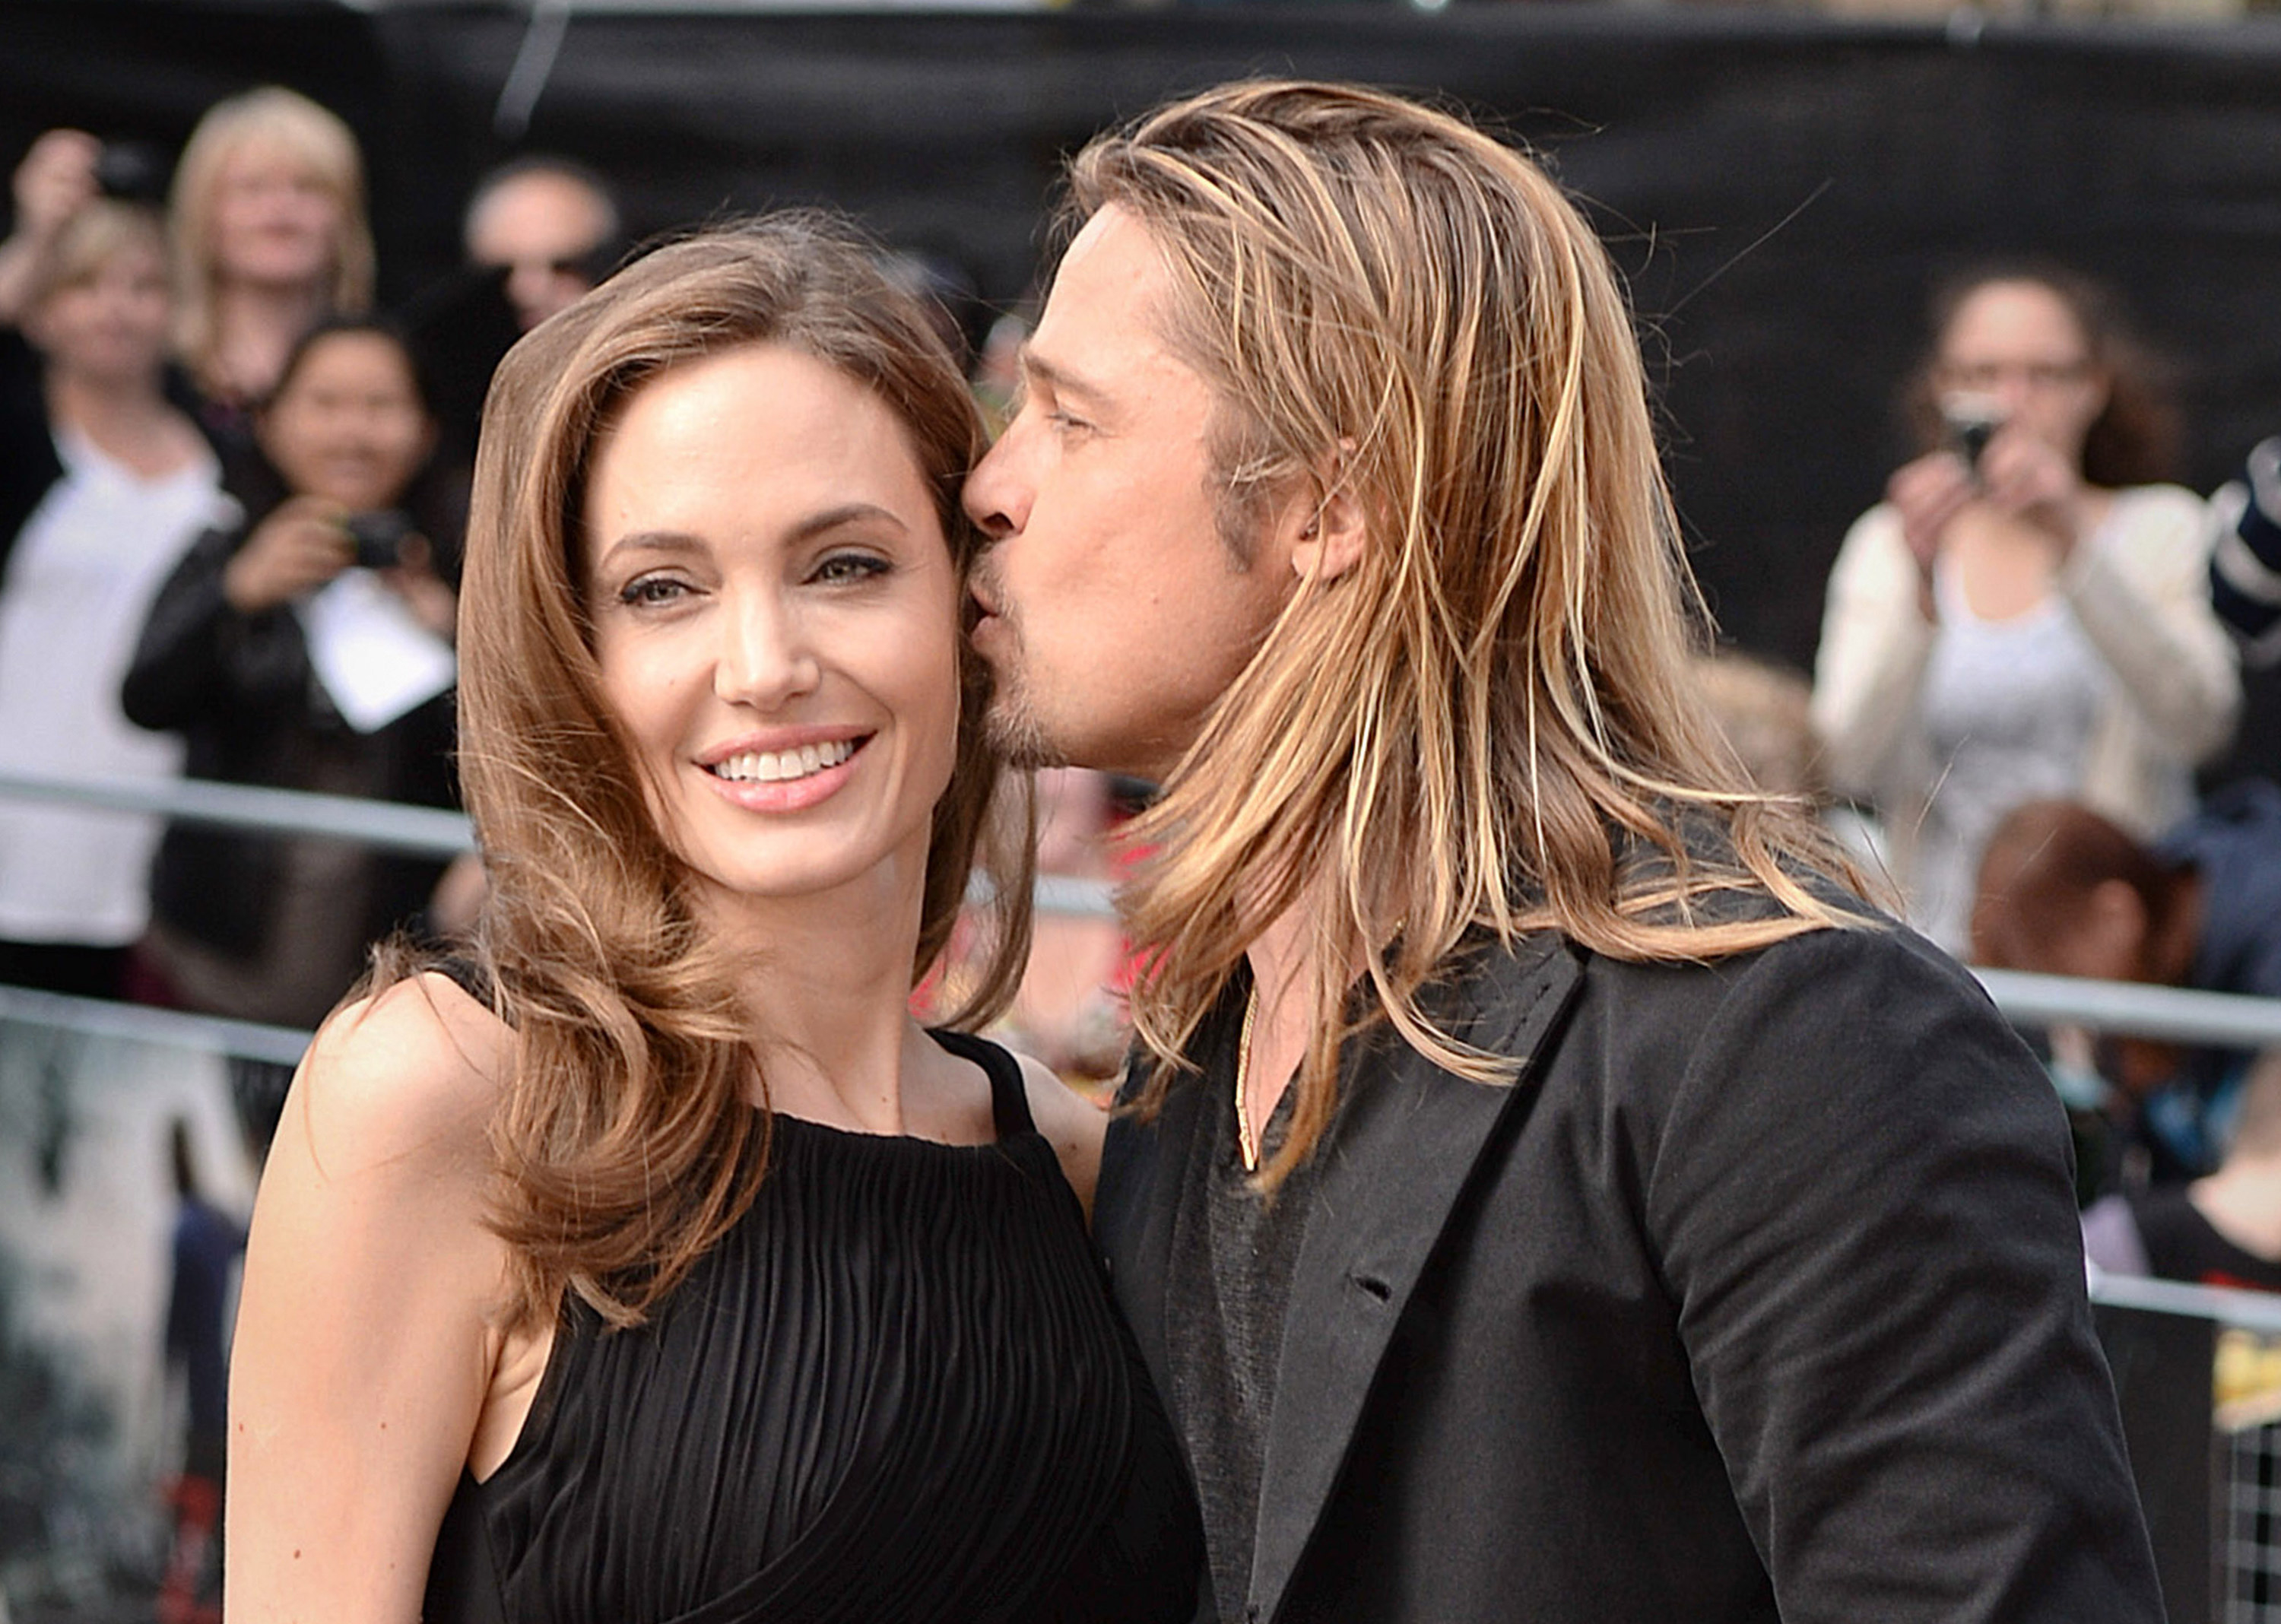 Angelina Jolie smiles while Brad Pitt leans in to give her a kiss on the cheek